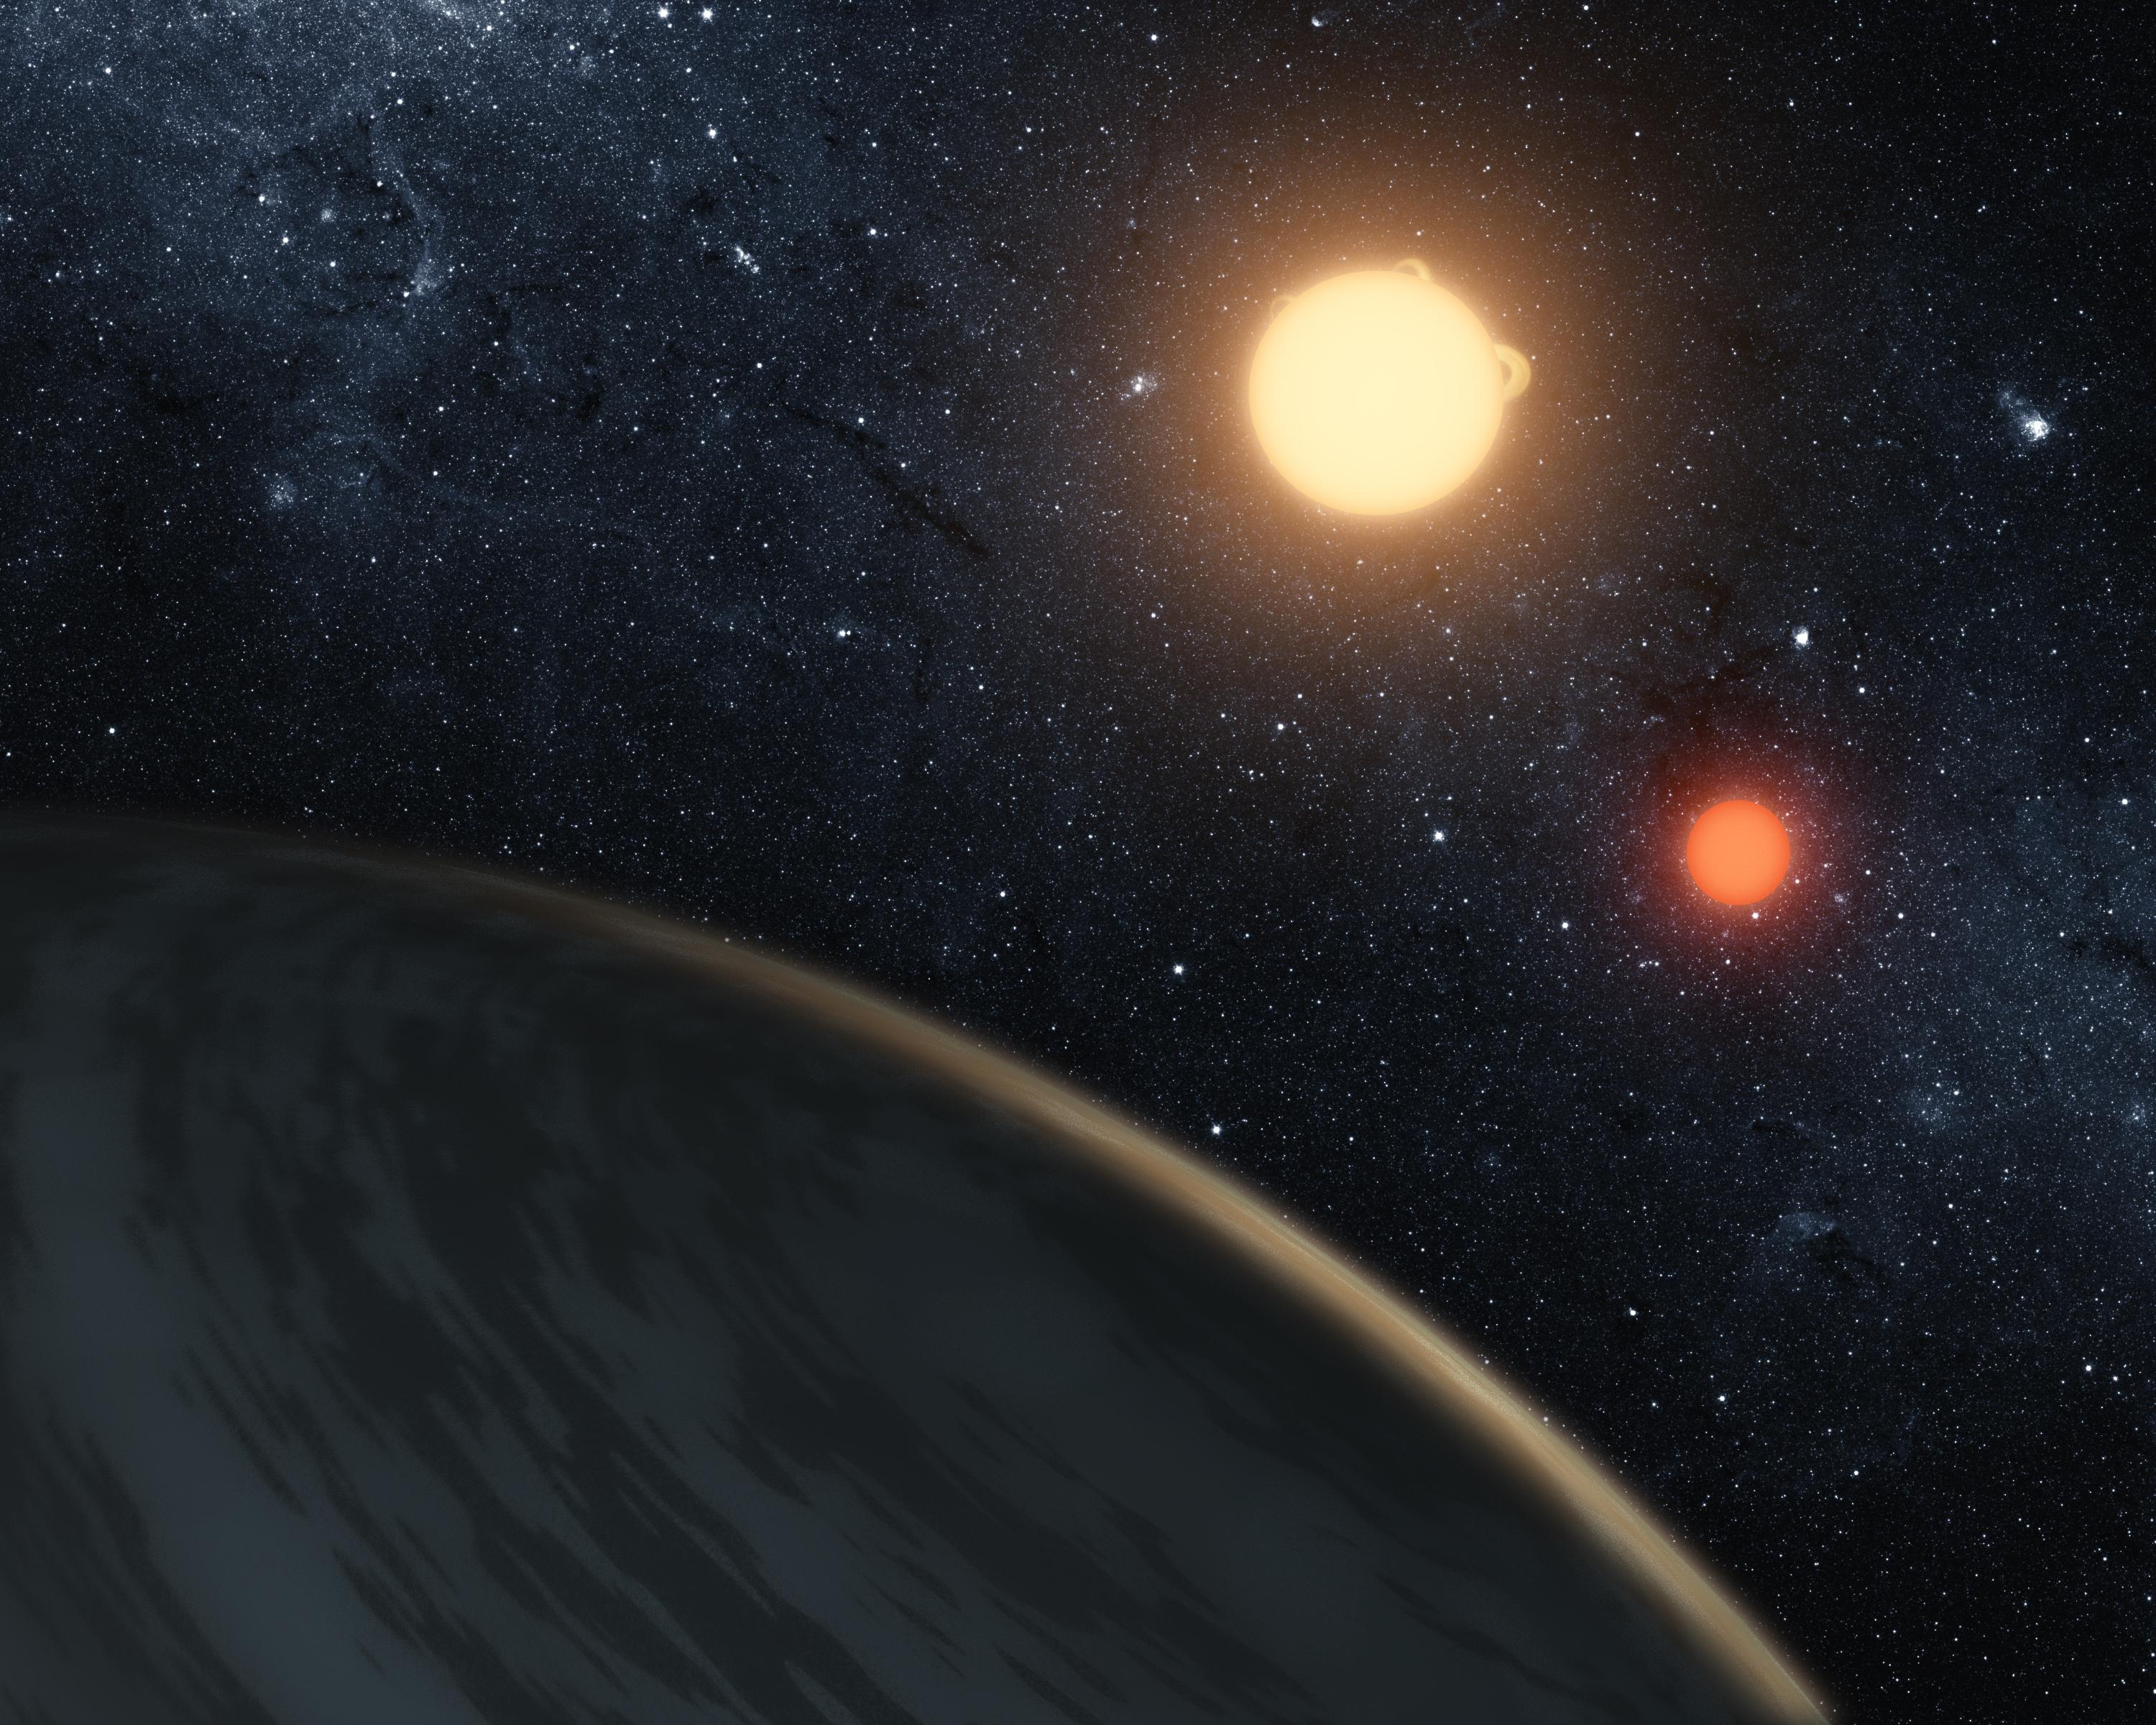 This artist's concept obtained October 30, 2018 courtesy of NASA/Ames/JPL-Caltech/T. Pyle, shows Kepler-16b, the first planet around a double-star system. (NASA/JPL-CALTECH/T. PYLE&mdash;AFP/Getty Images)